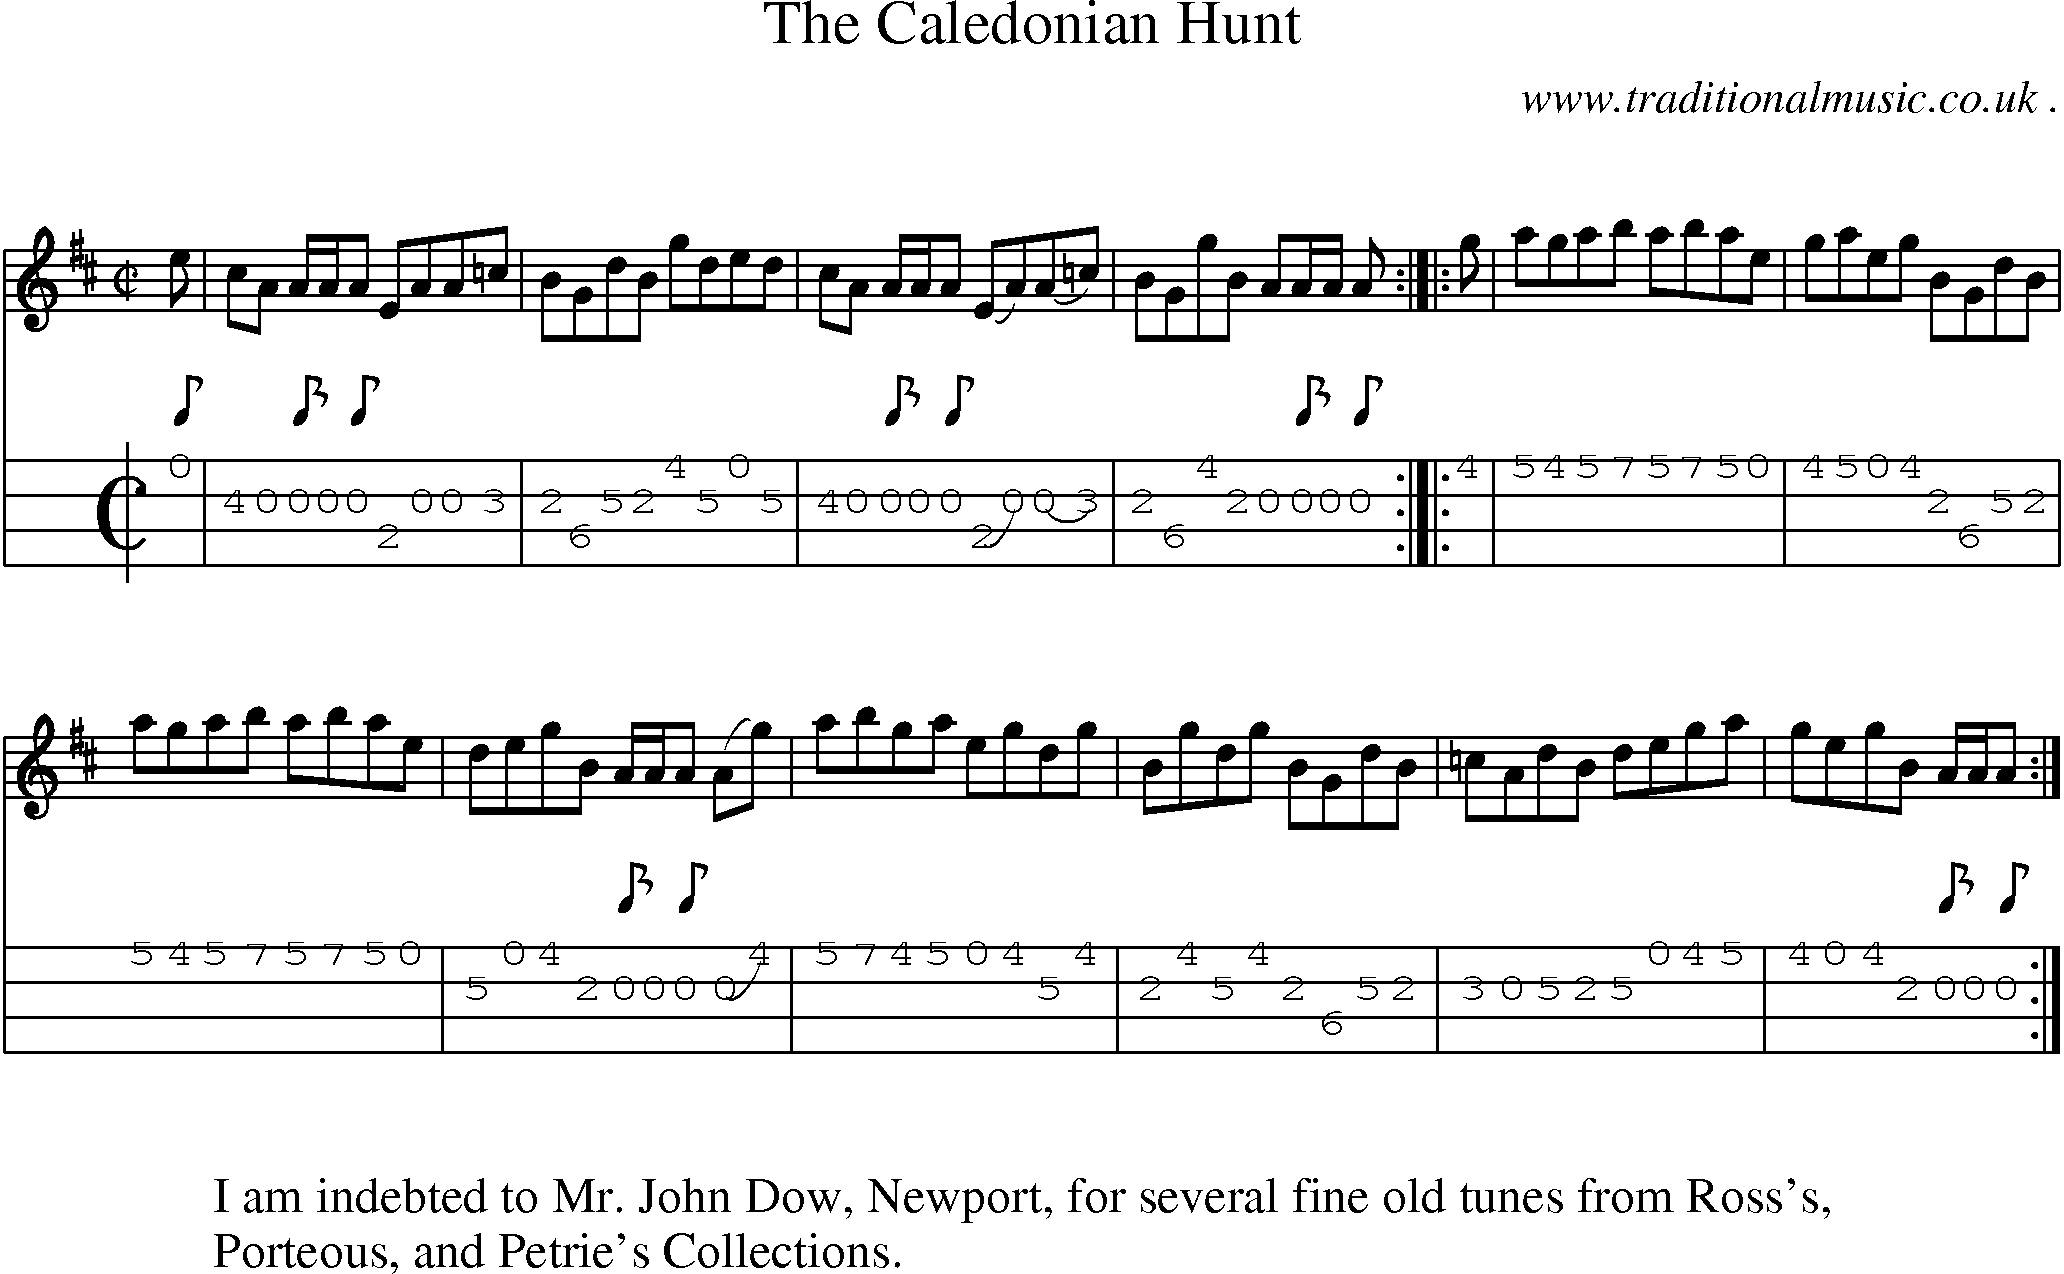 Sheet-music  score, Chords and Mandolin Tabs for The Caledonian Hunt